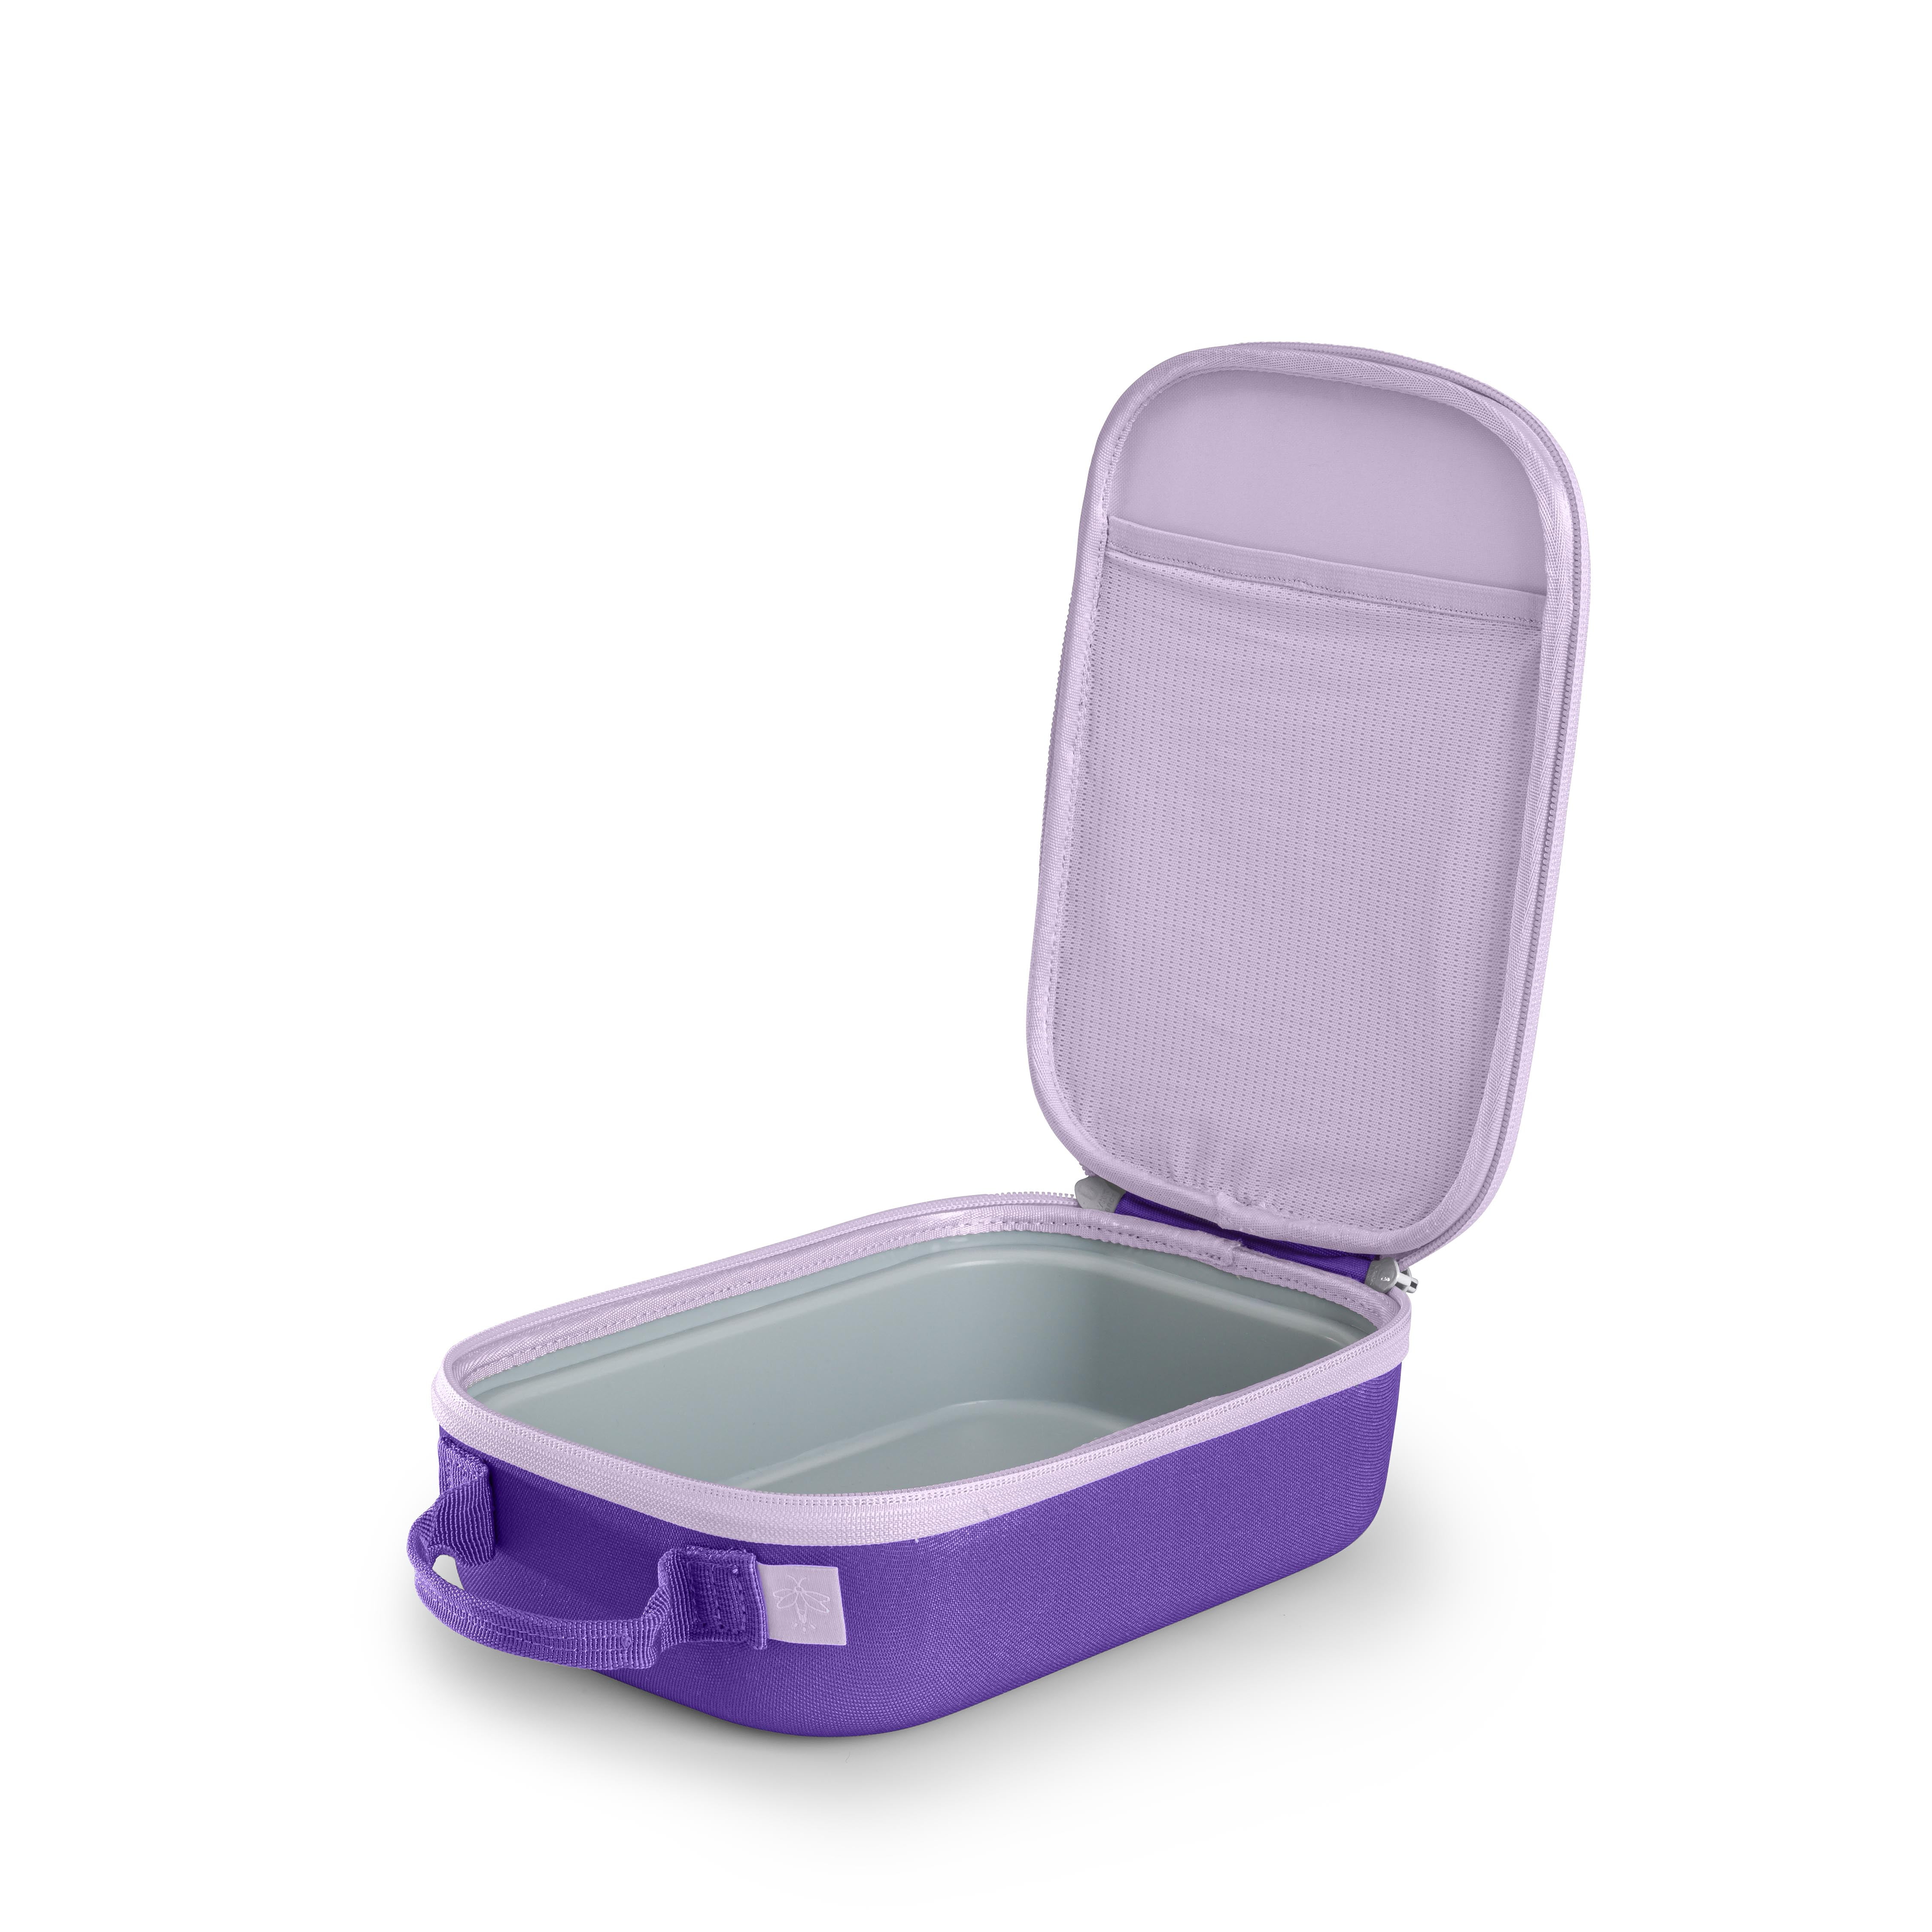 Firefly! Outdoor Gear Youth Insulated Reusable Lunch Box, Luch Bag, Purple,  Age Group 8-12 Years Old 